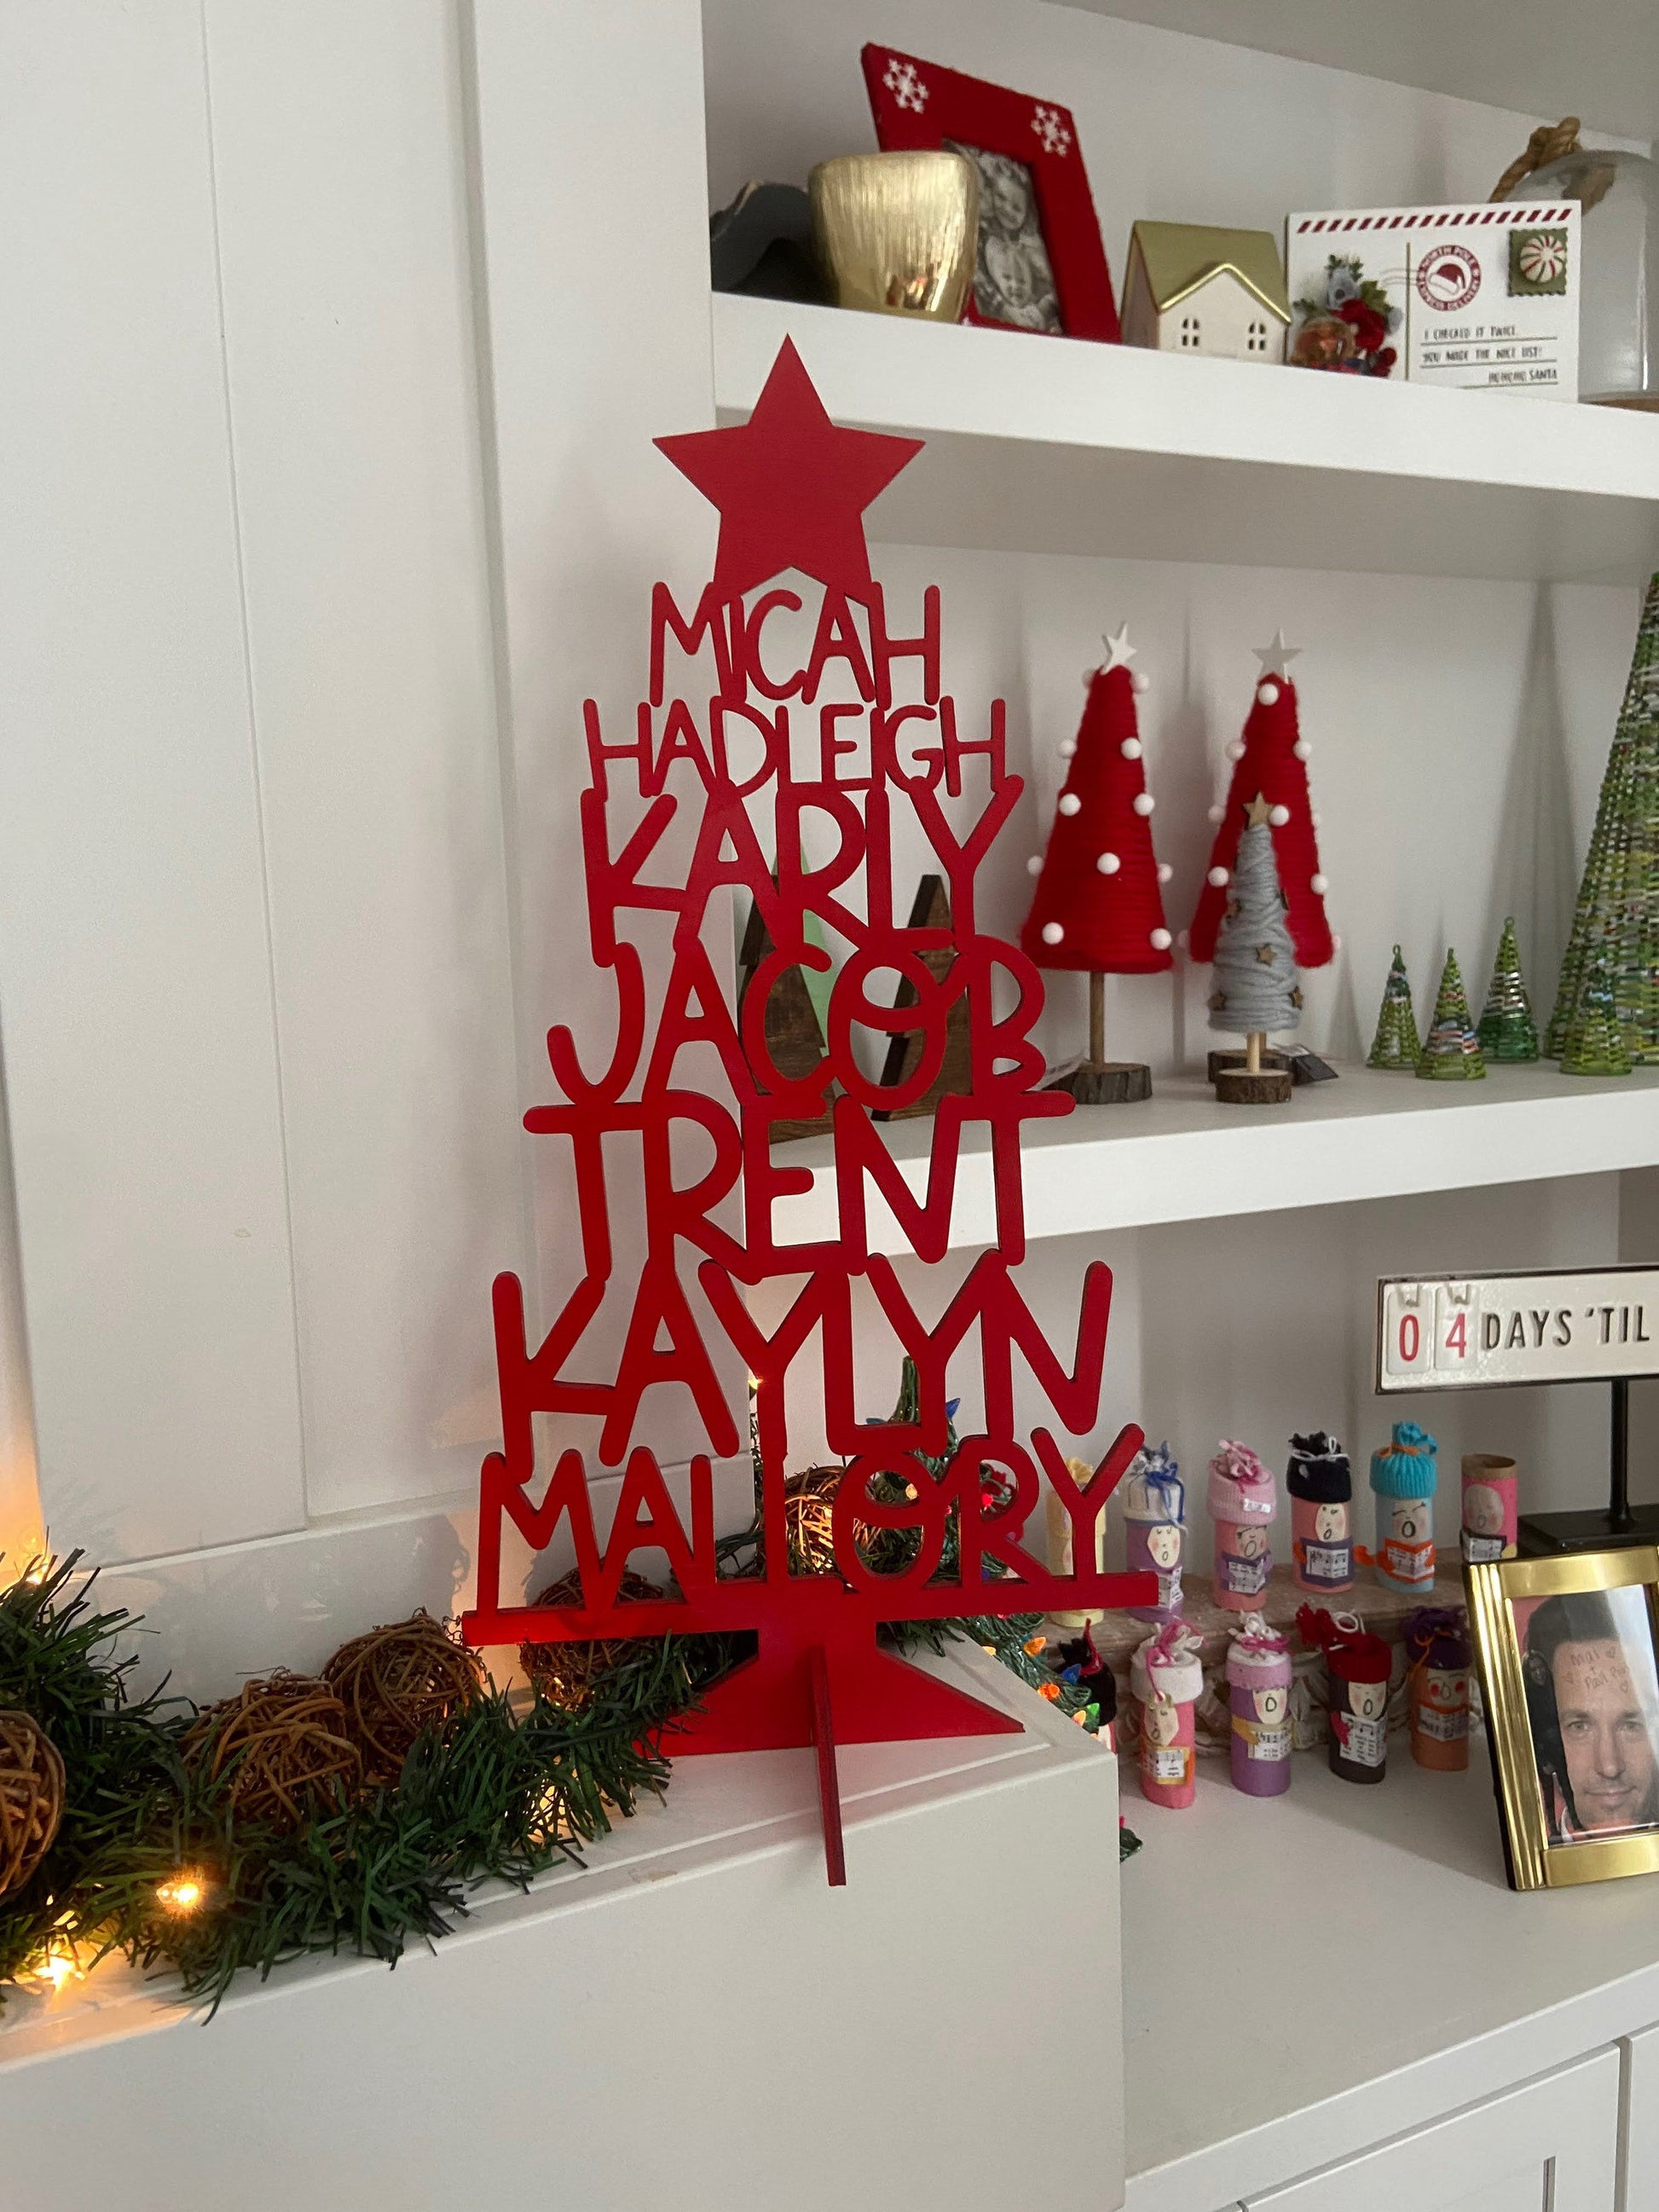 Your People Holiday Acrylic/Wood Tree Personalized with Names, Family & Kids Names Tree, Gift for Mom, Dad, Grandma, Grandpa [FREE SHIPPING]